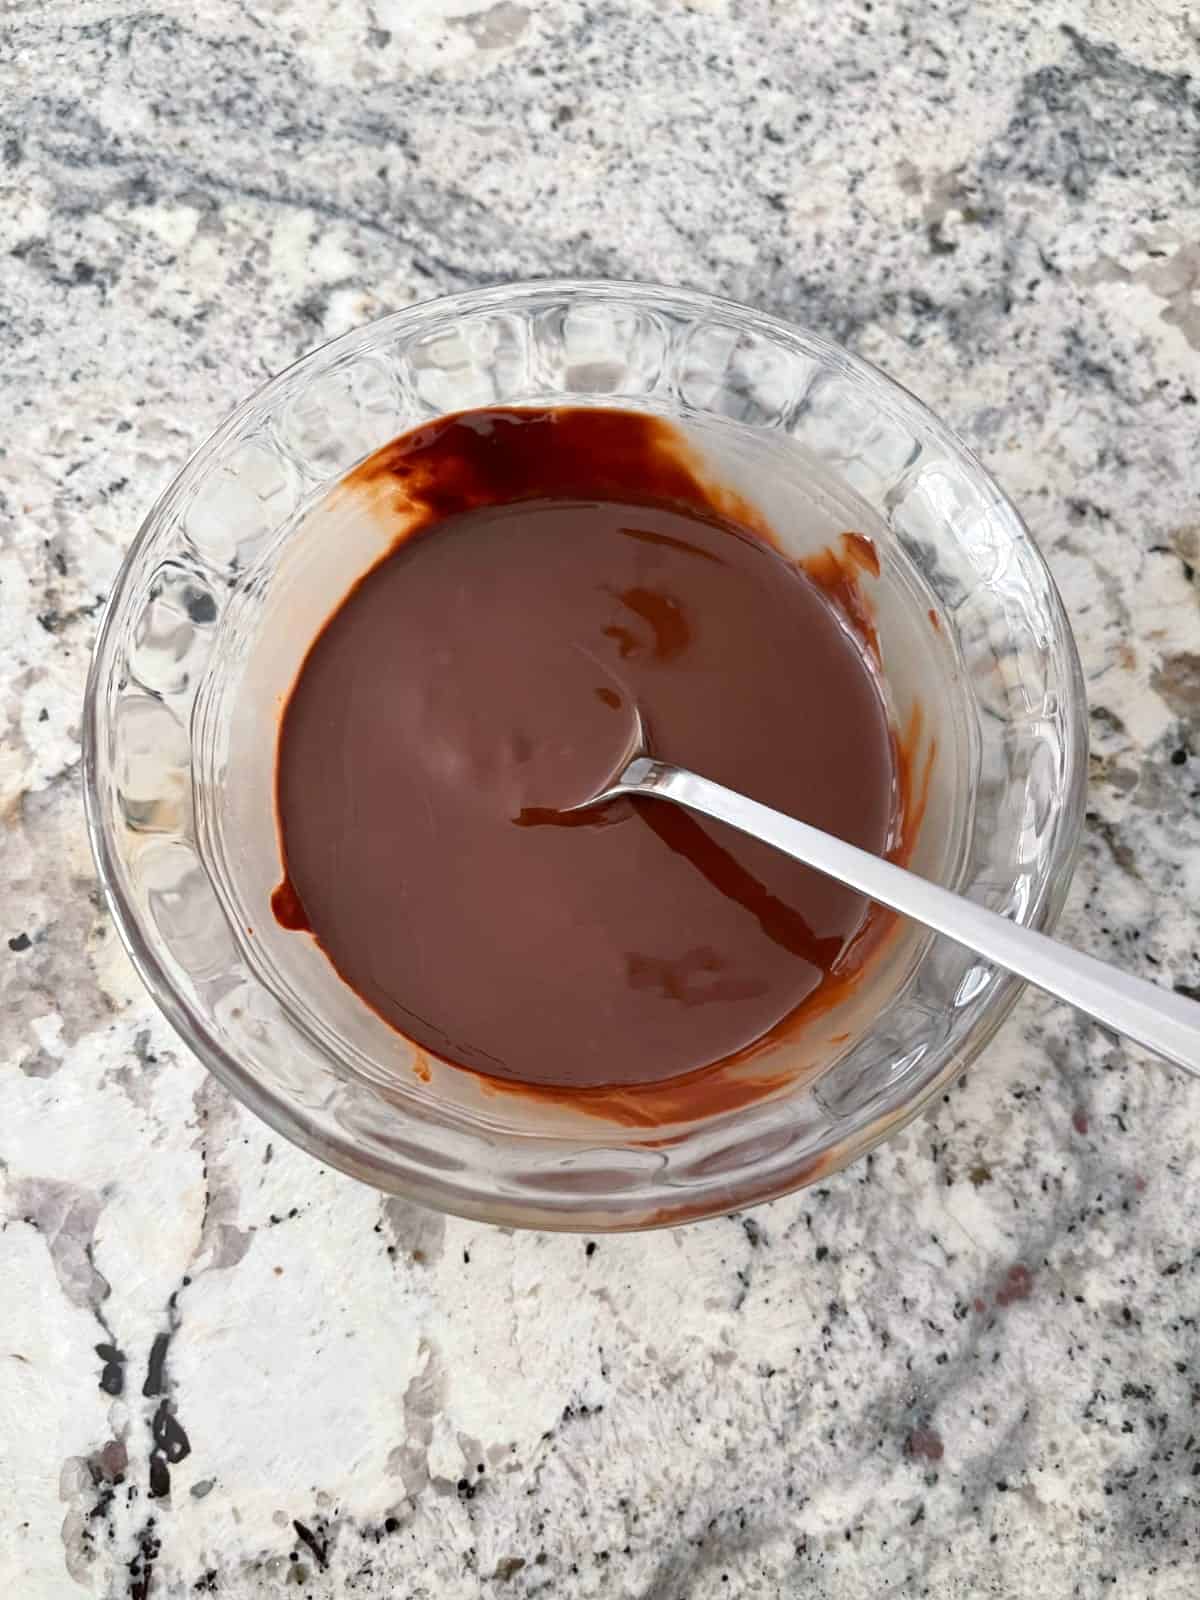 Stirring melted chocolate with spoon in small glass bowl.